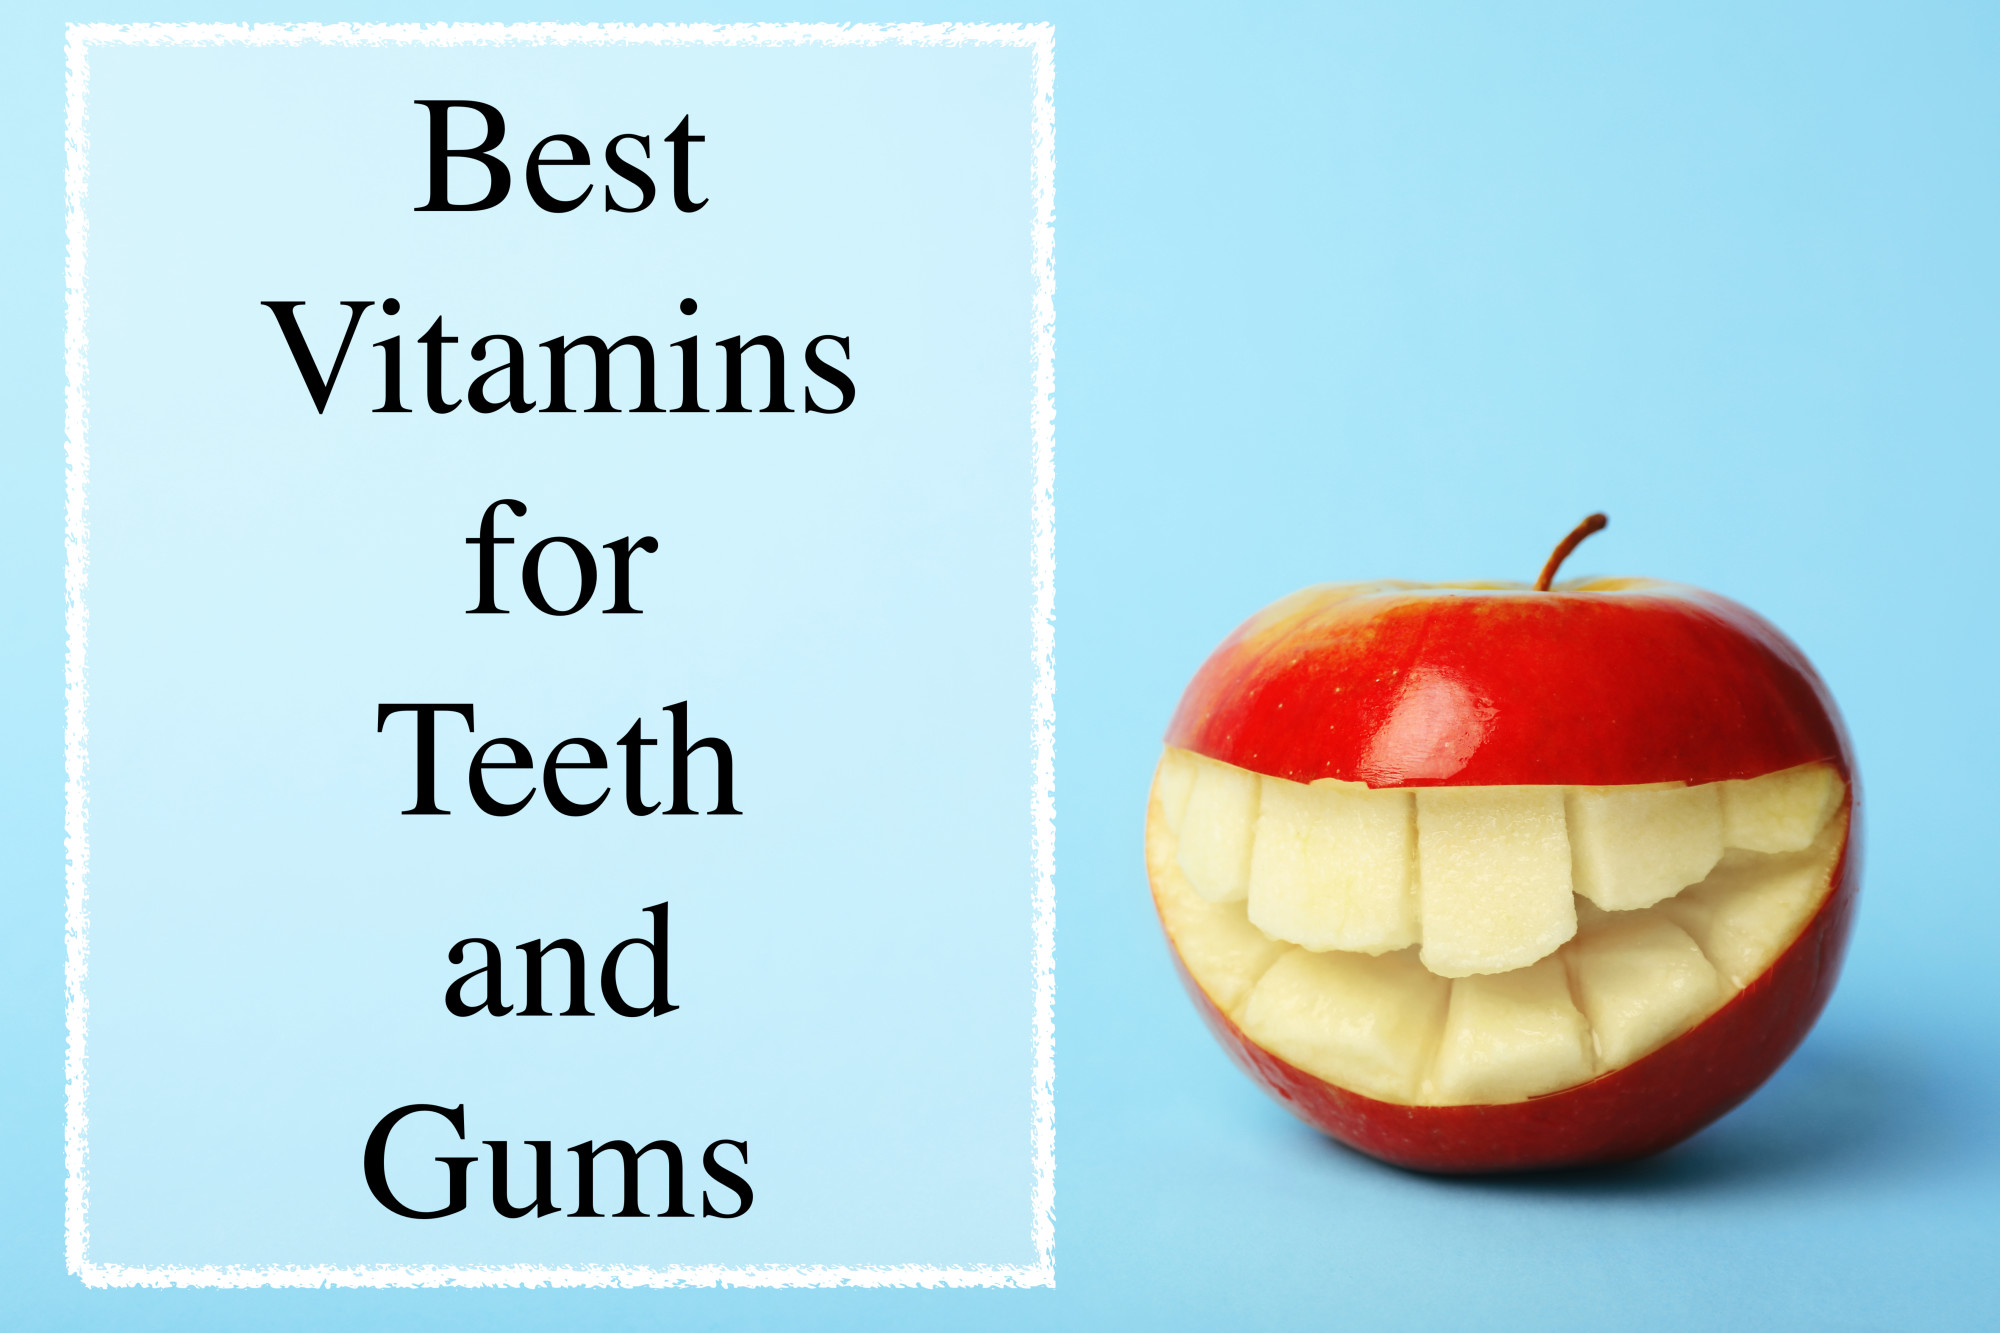 The 5 Best Vitamins for Teeth and Gums